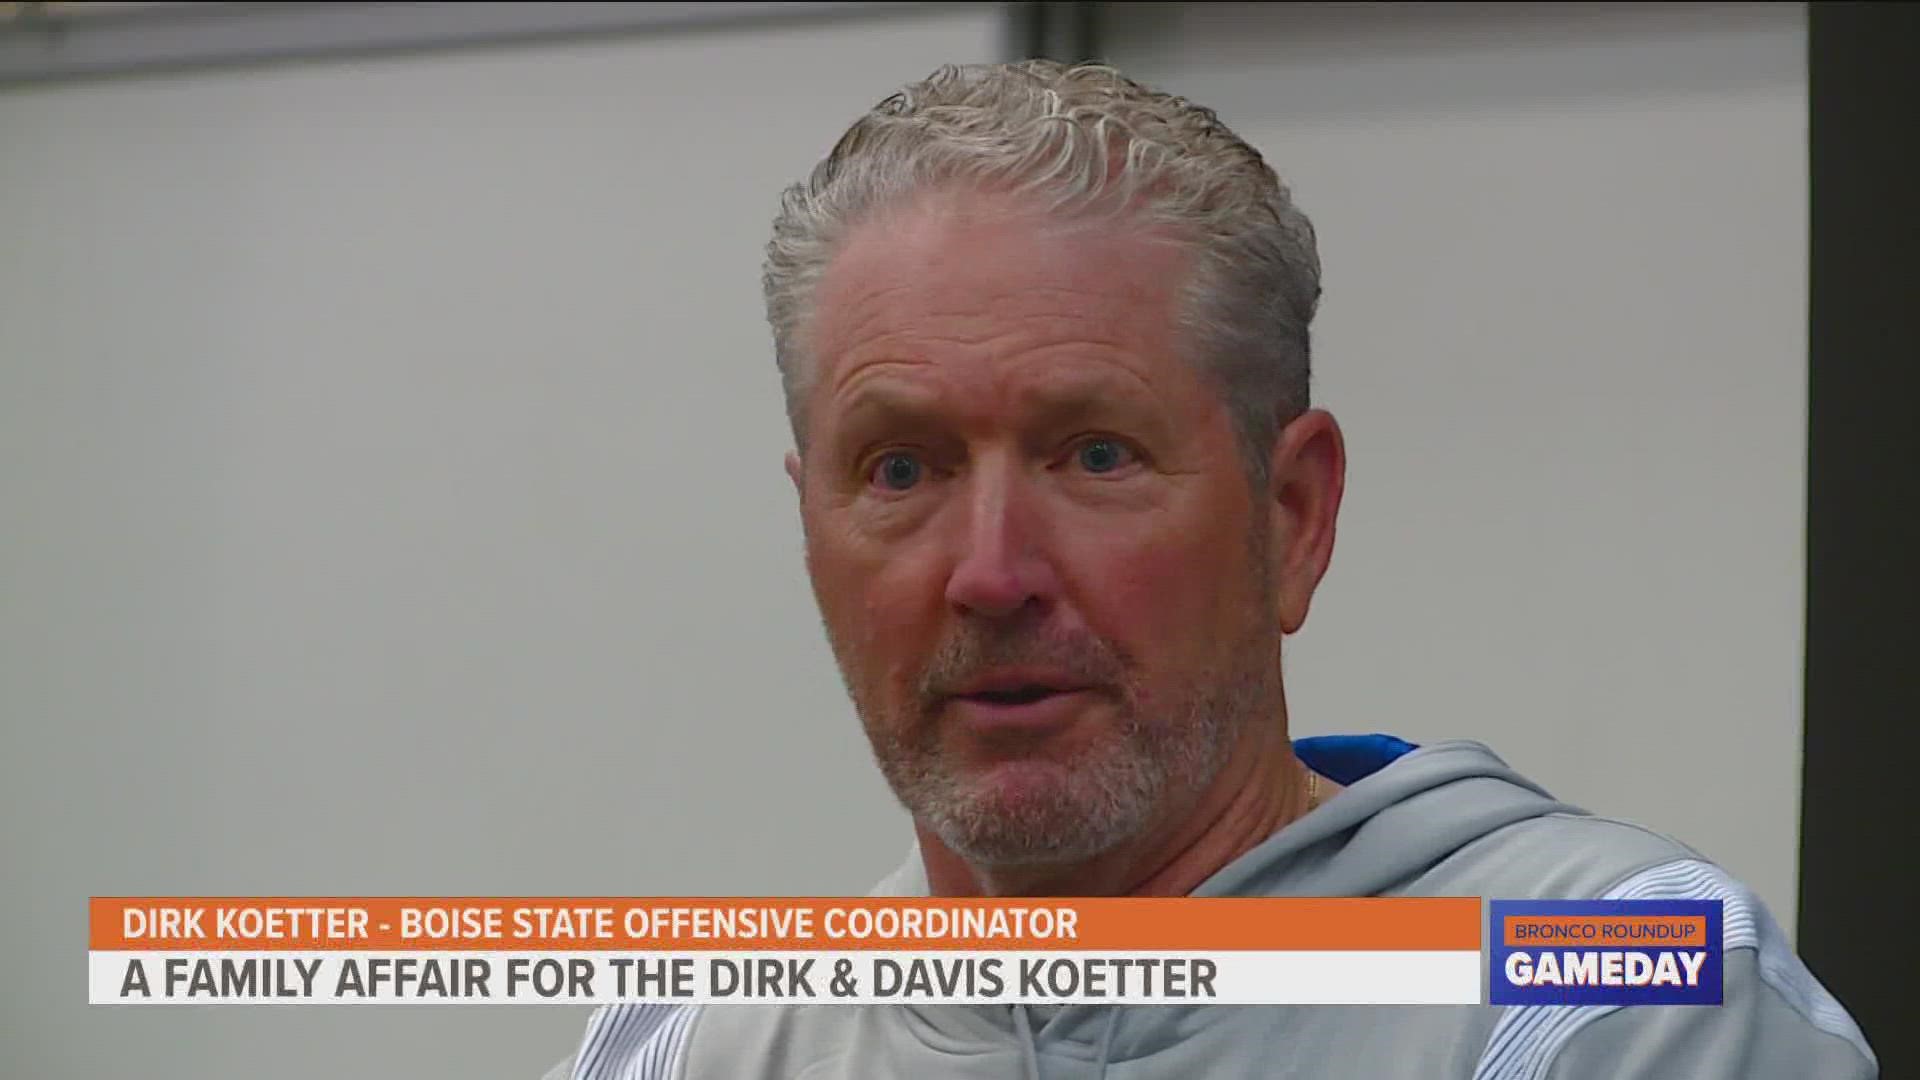 For the first time, Dirk Koetter gets to coach his son. While the opportunity at Boise State is special, the father-son duo is focused on "winning a ring" in 2022.